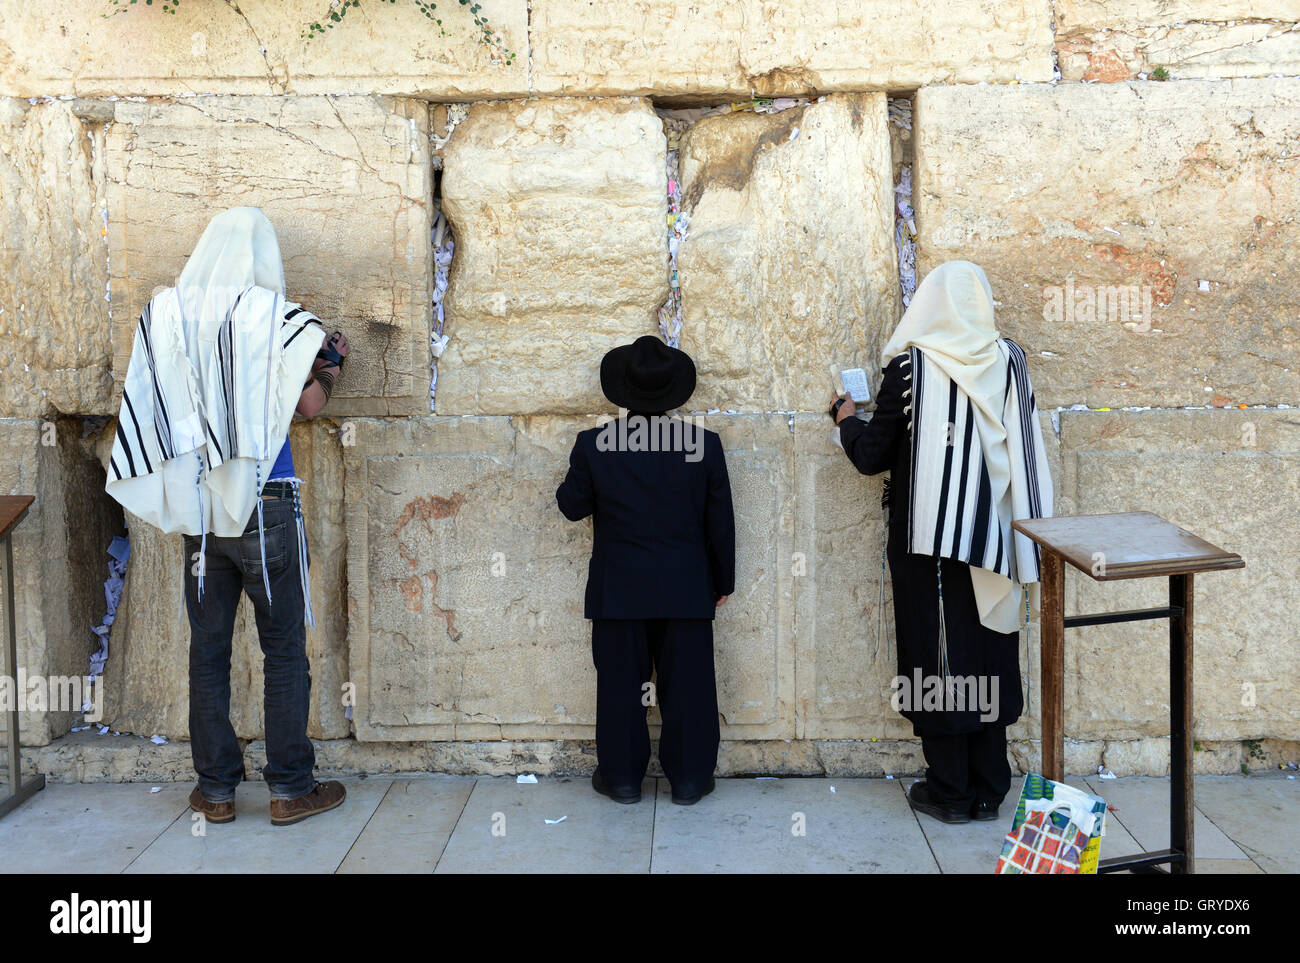 Jewish men praying by the Wailing wall in the old city of Jerusalem. Stock Photo